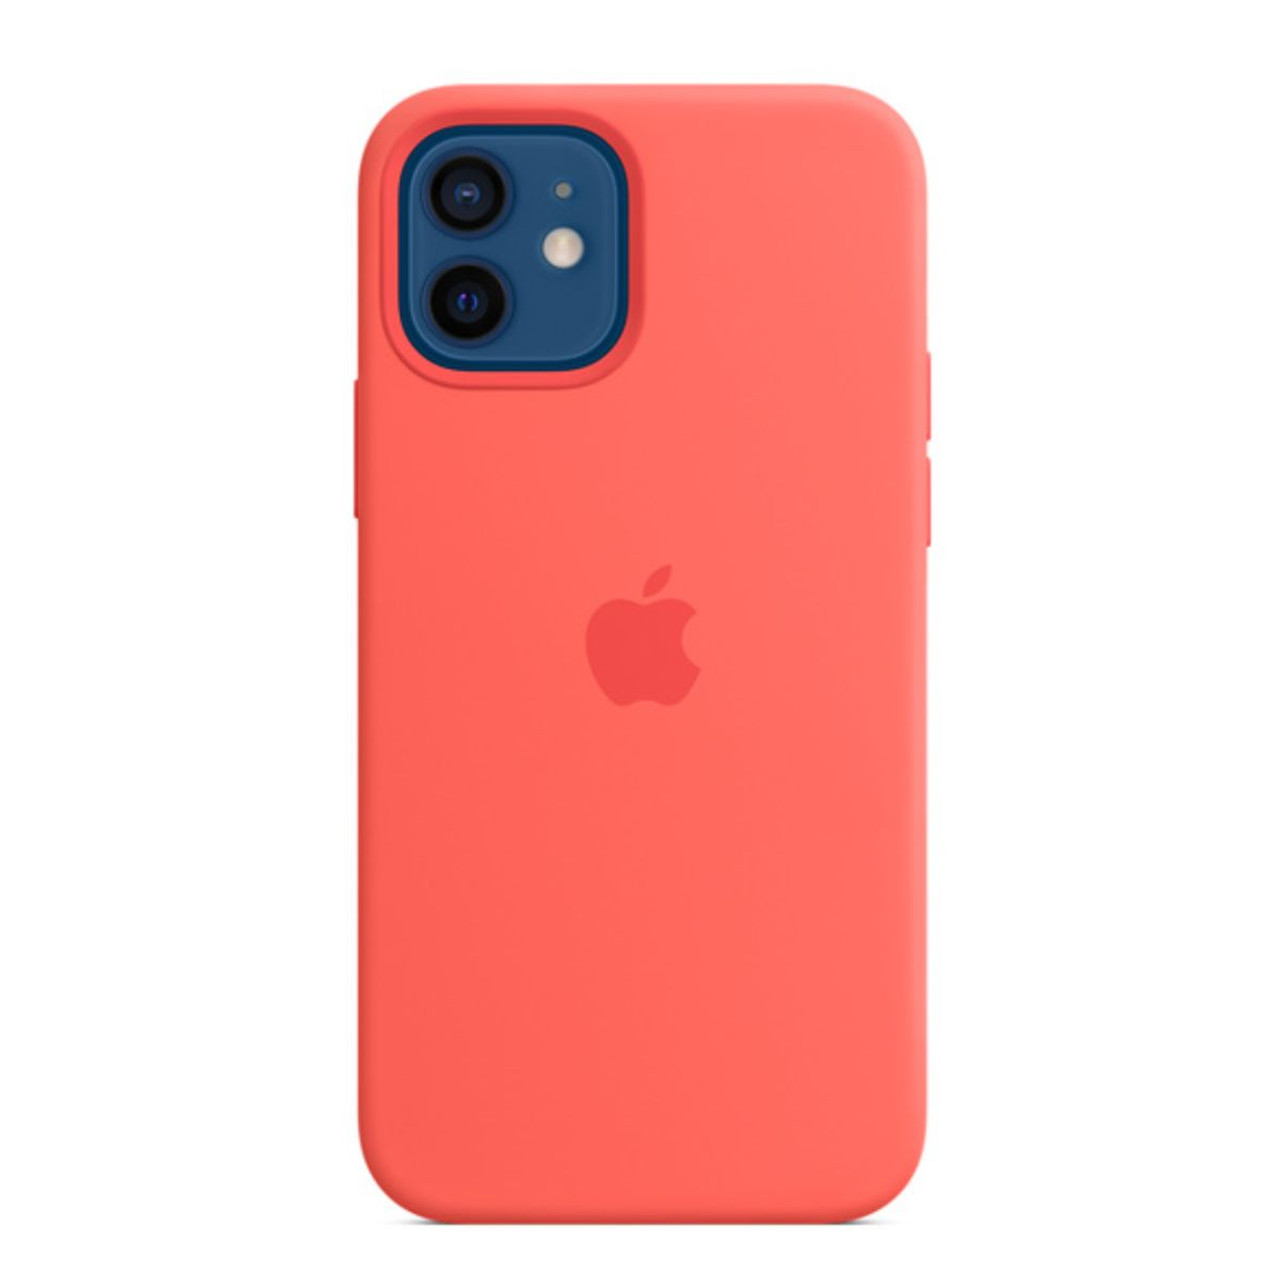 Apple iPhone 12 Pro Max Silicone Case product image